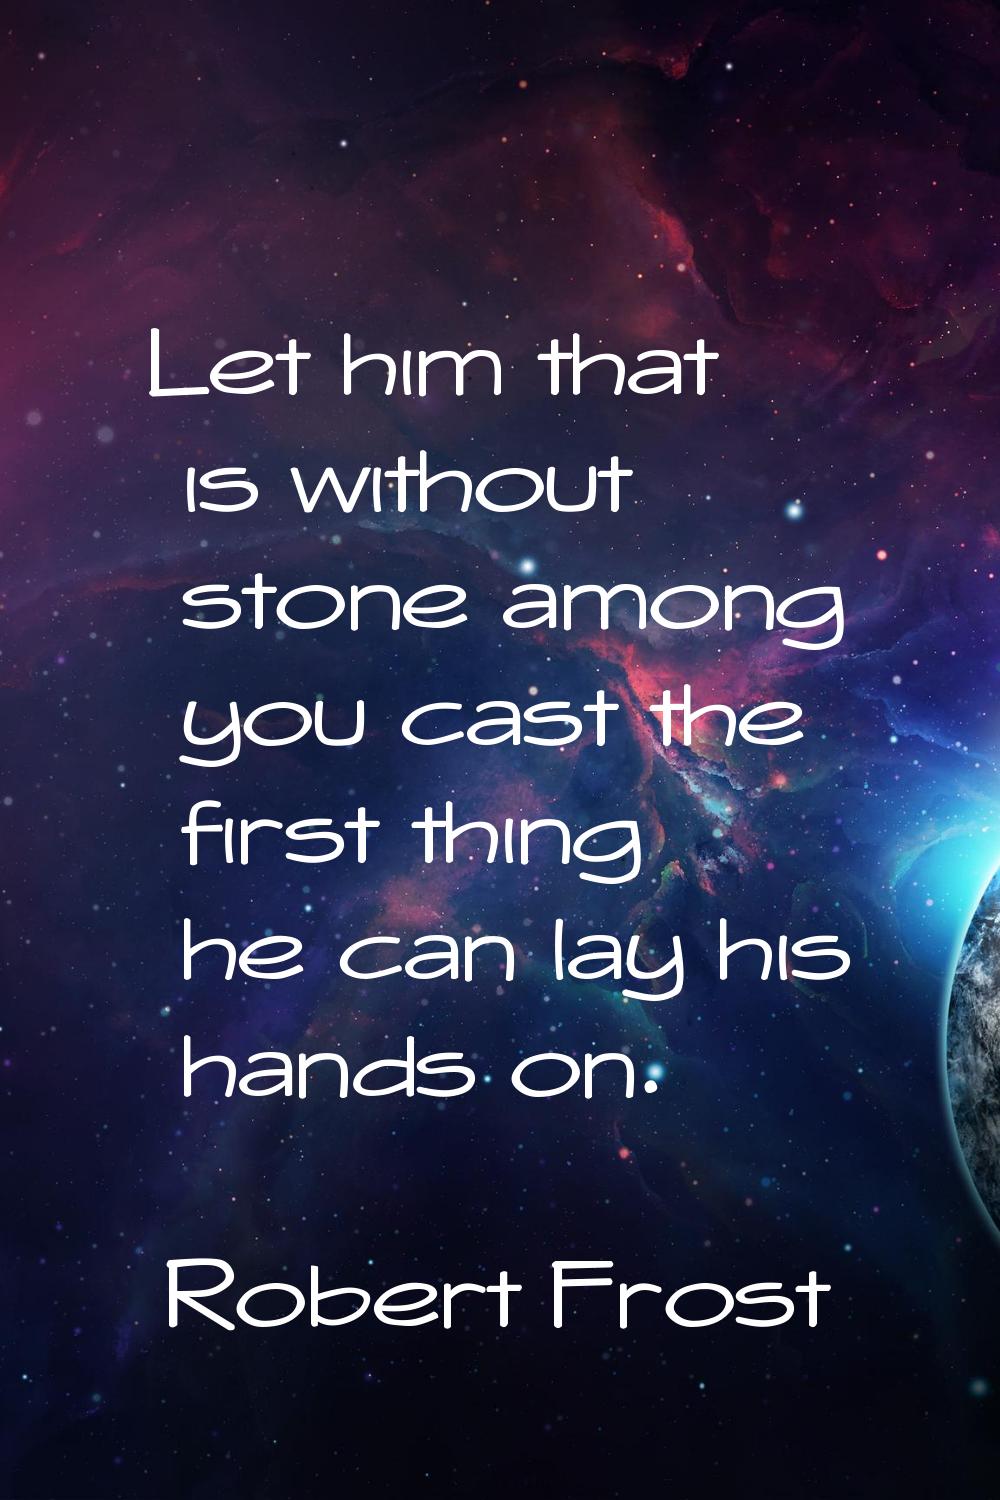 Let him that is without stone among you cast the first thing he can lay his hands on.